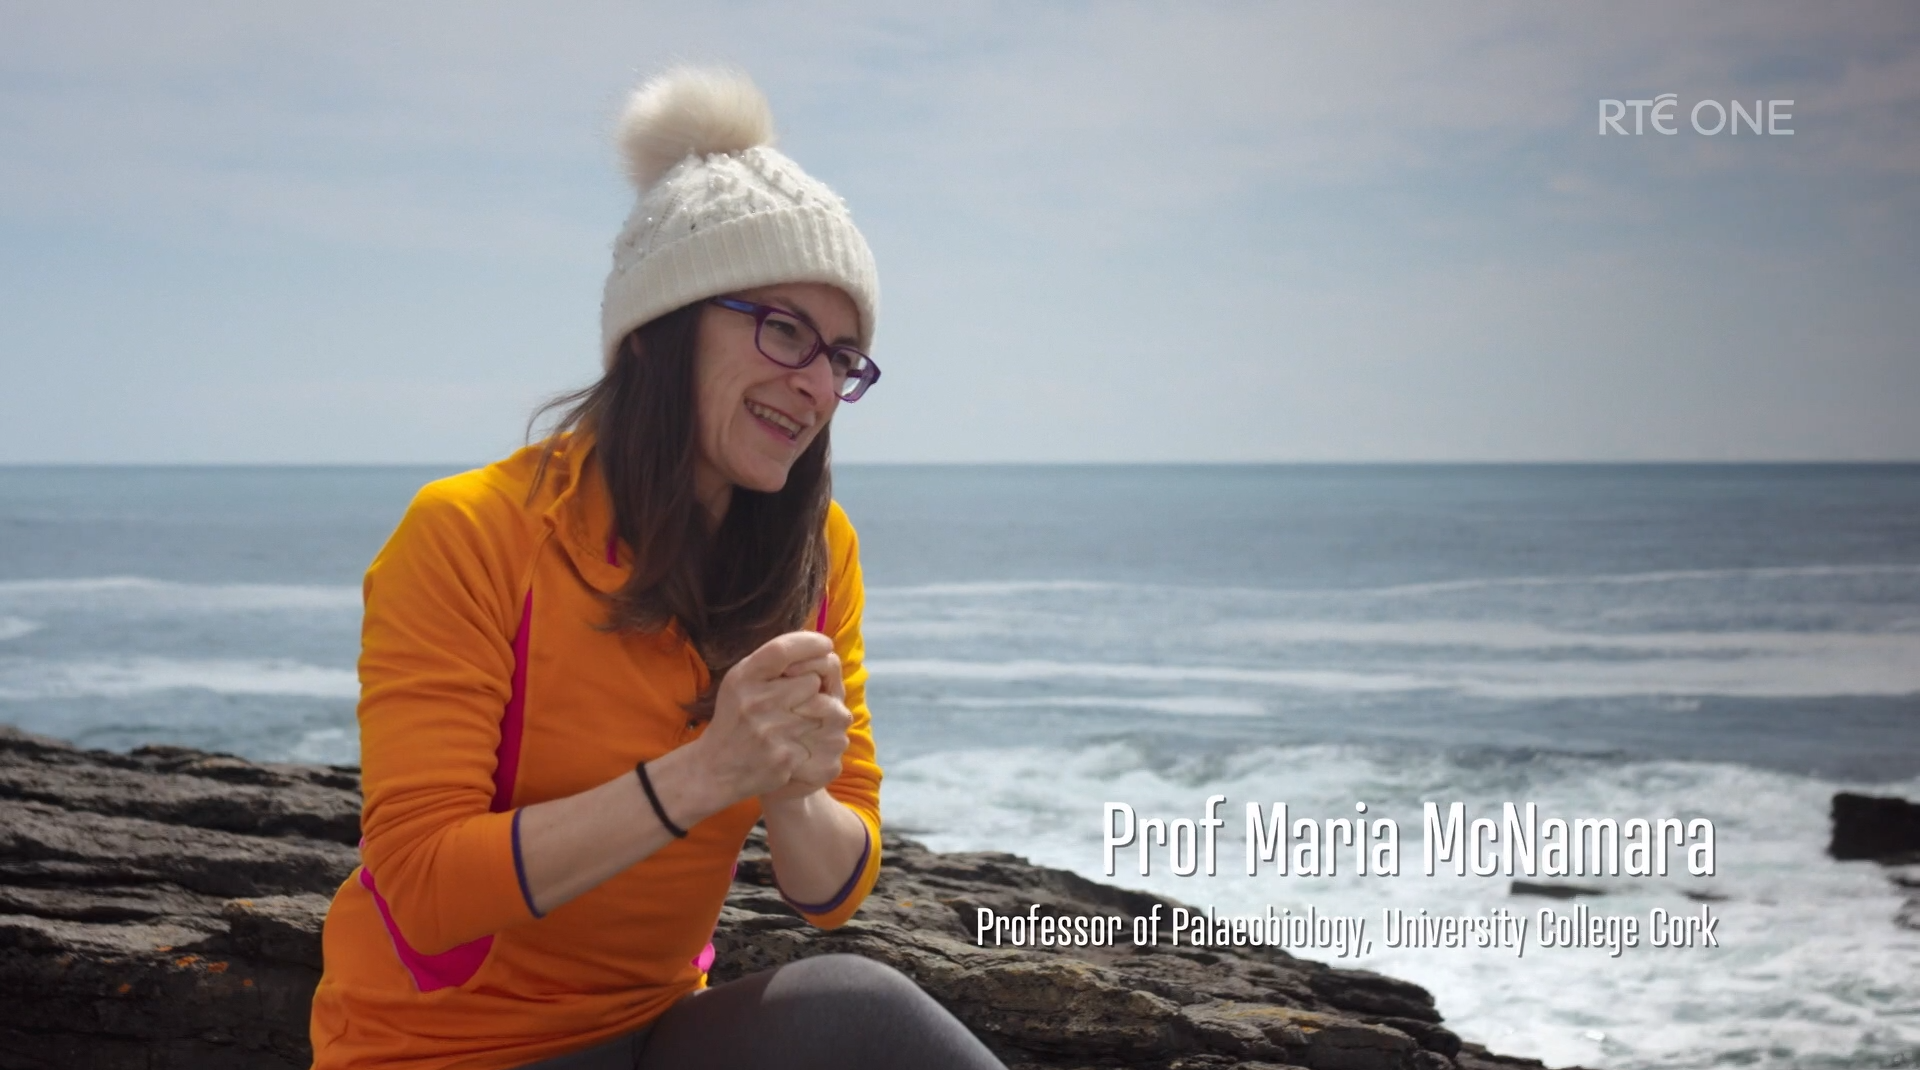 NEW! Maria features in the new RTE documentary “The Island”